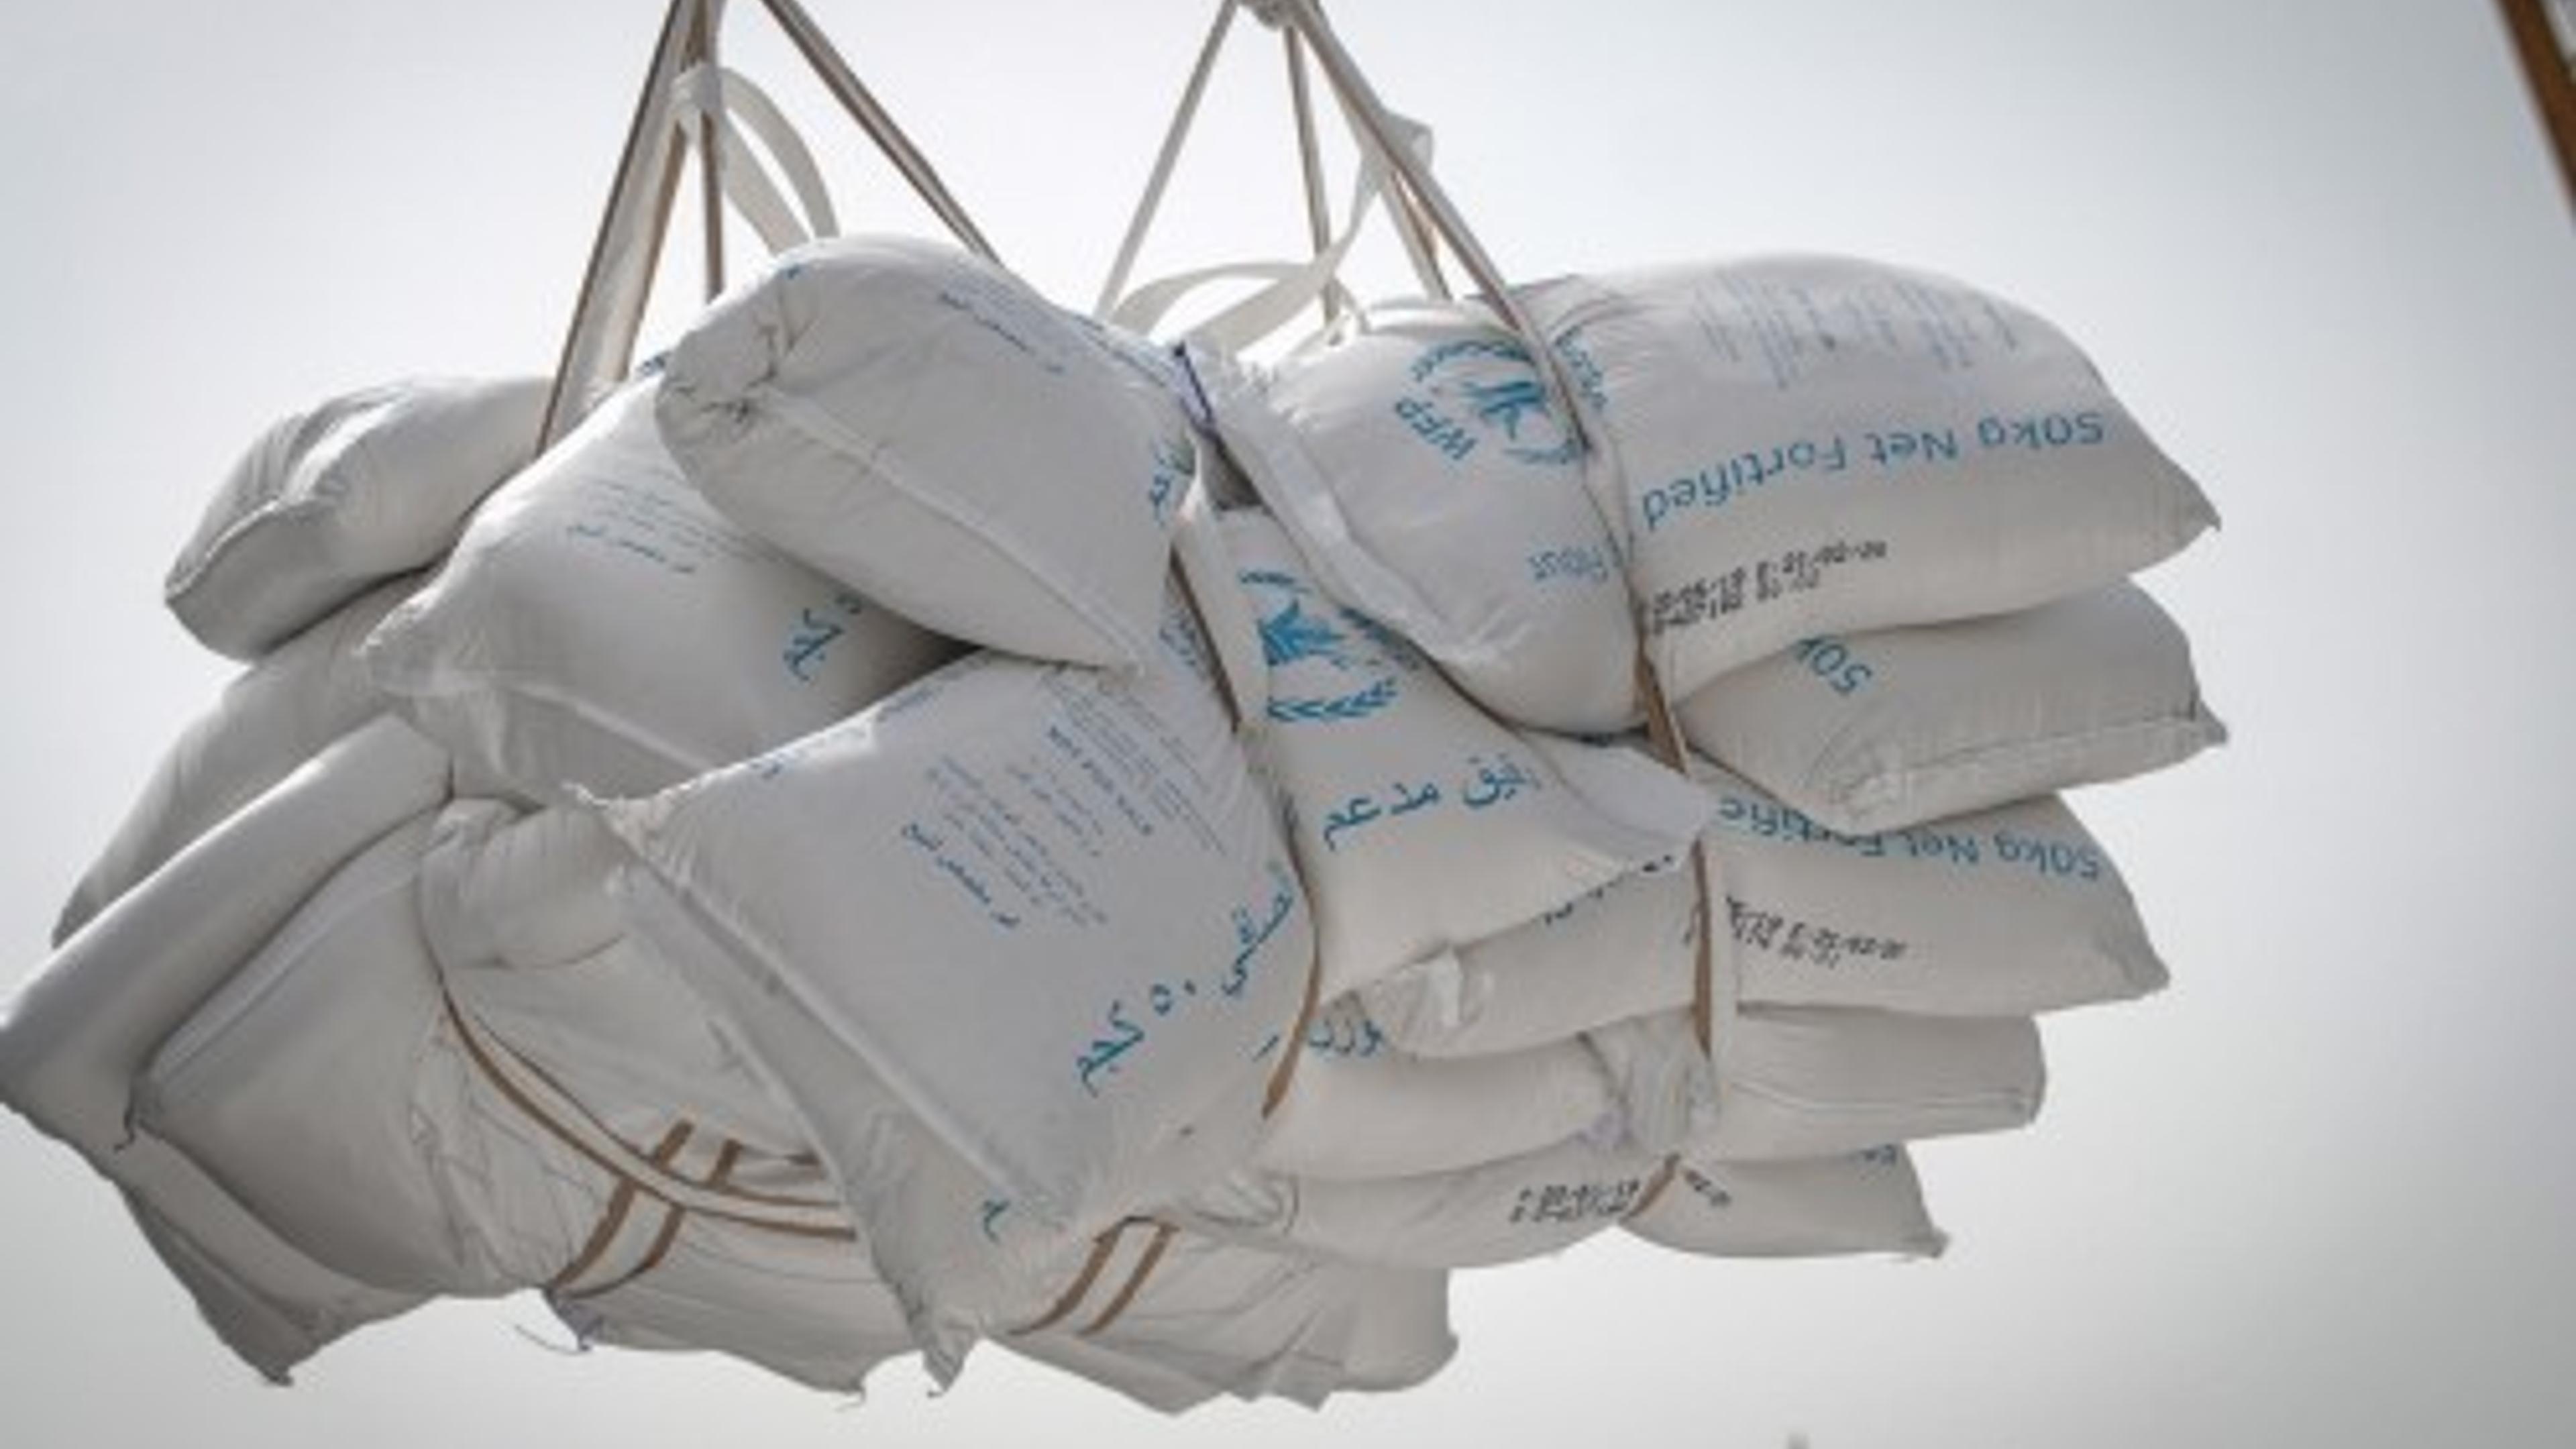 A bunch of big plastic bags with rice being transported